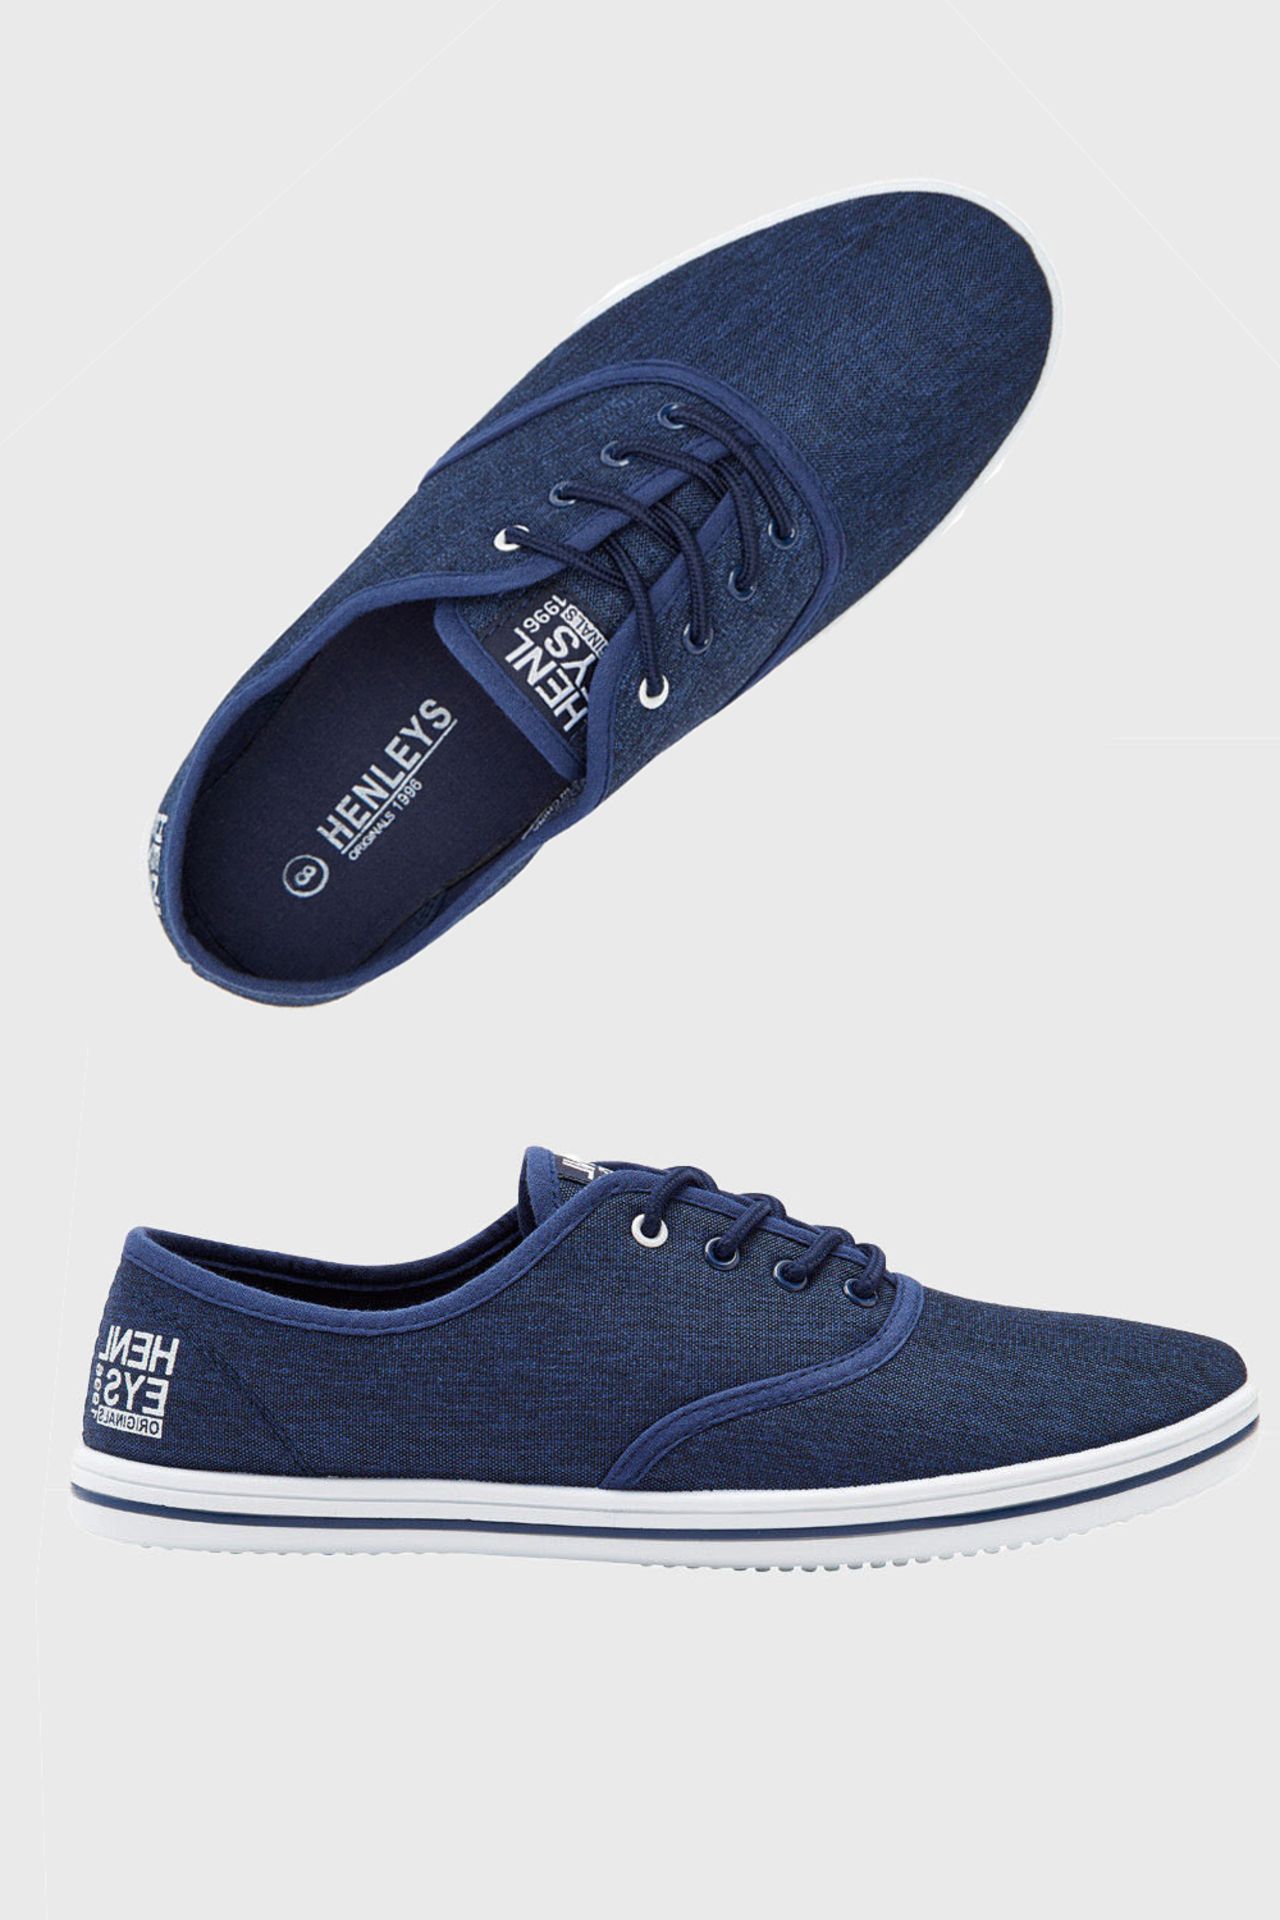 18 X BRAND NEW MENS HENLEYS LACE UP MILO NAVY TRAINER PLIMSOLLS IN SIZE 7 - RRP-£24.99PP IN 2 BAGS